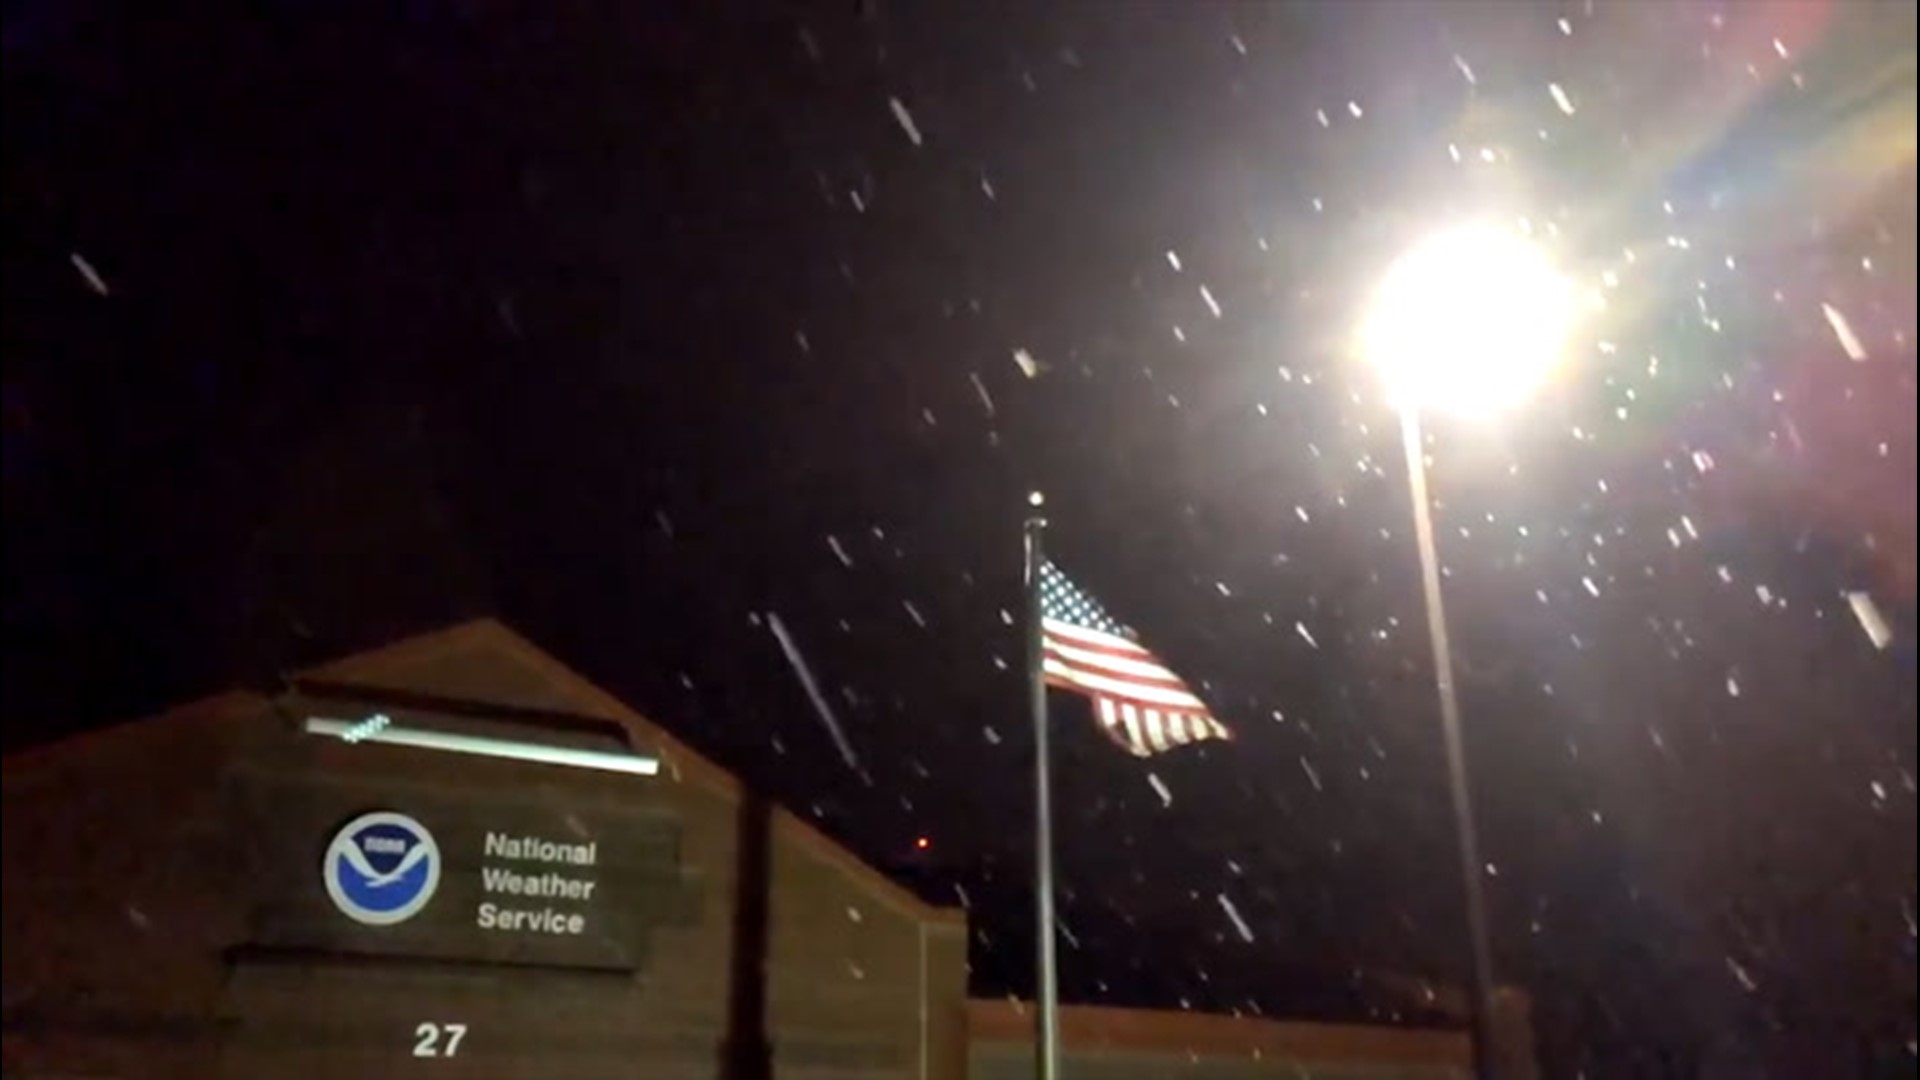 Wintry weather came early to Bismarck, North Dakota, as snow fell outside the local National Weather Service building early on Oct. 17.